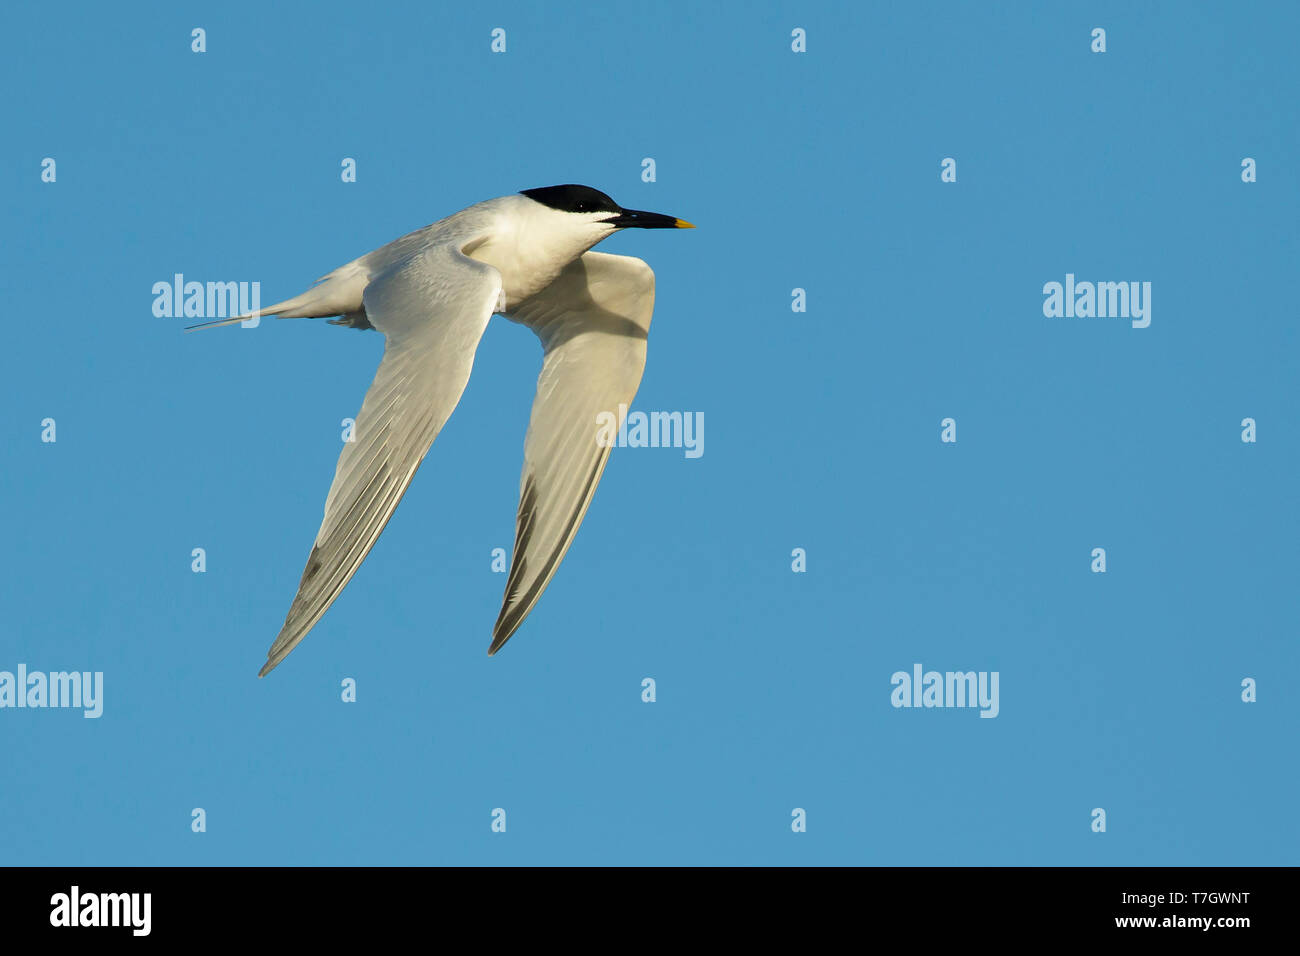 Adult Cabot's Tern (Thalasseus acuflavidus) in flight against a blue sky as background in Galveston County, Texas, USA. Stock Photo